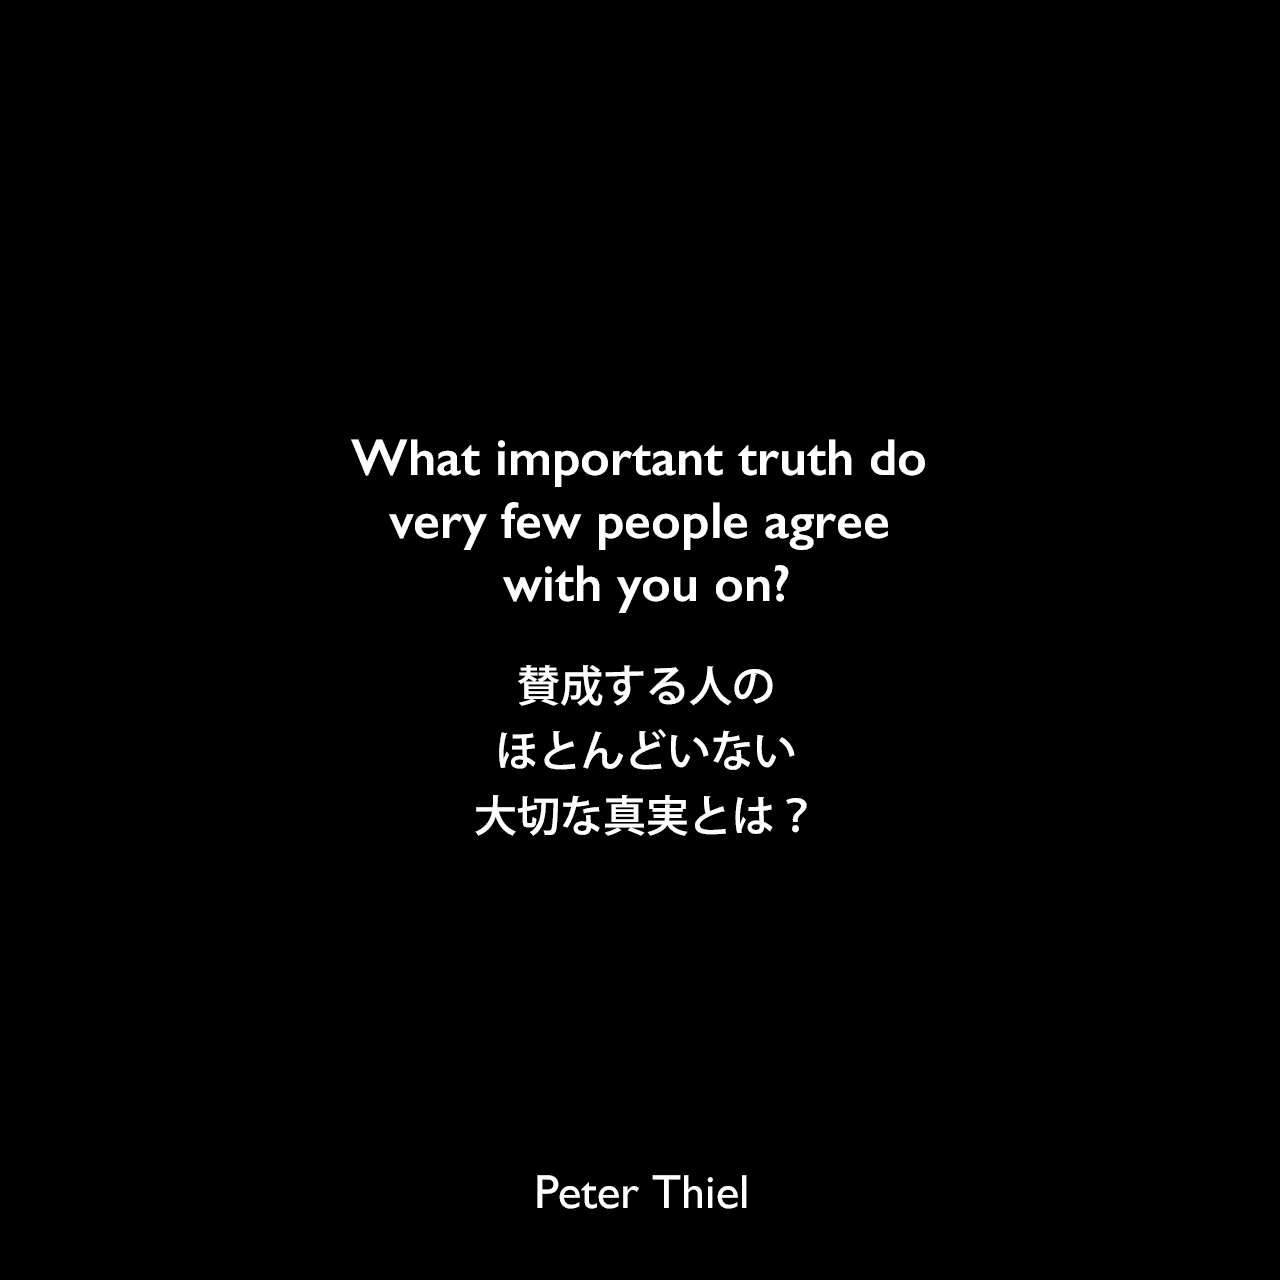 What important truth do very few people agree with you on?賛成する人のほとんどいない大切な真実とは？- ピーター・ティールの本「Zero to One」よりPeter Thiel